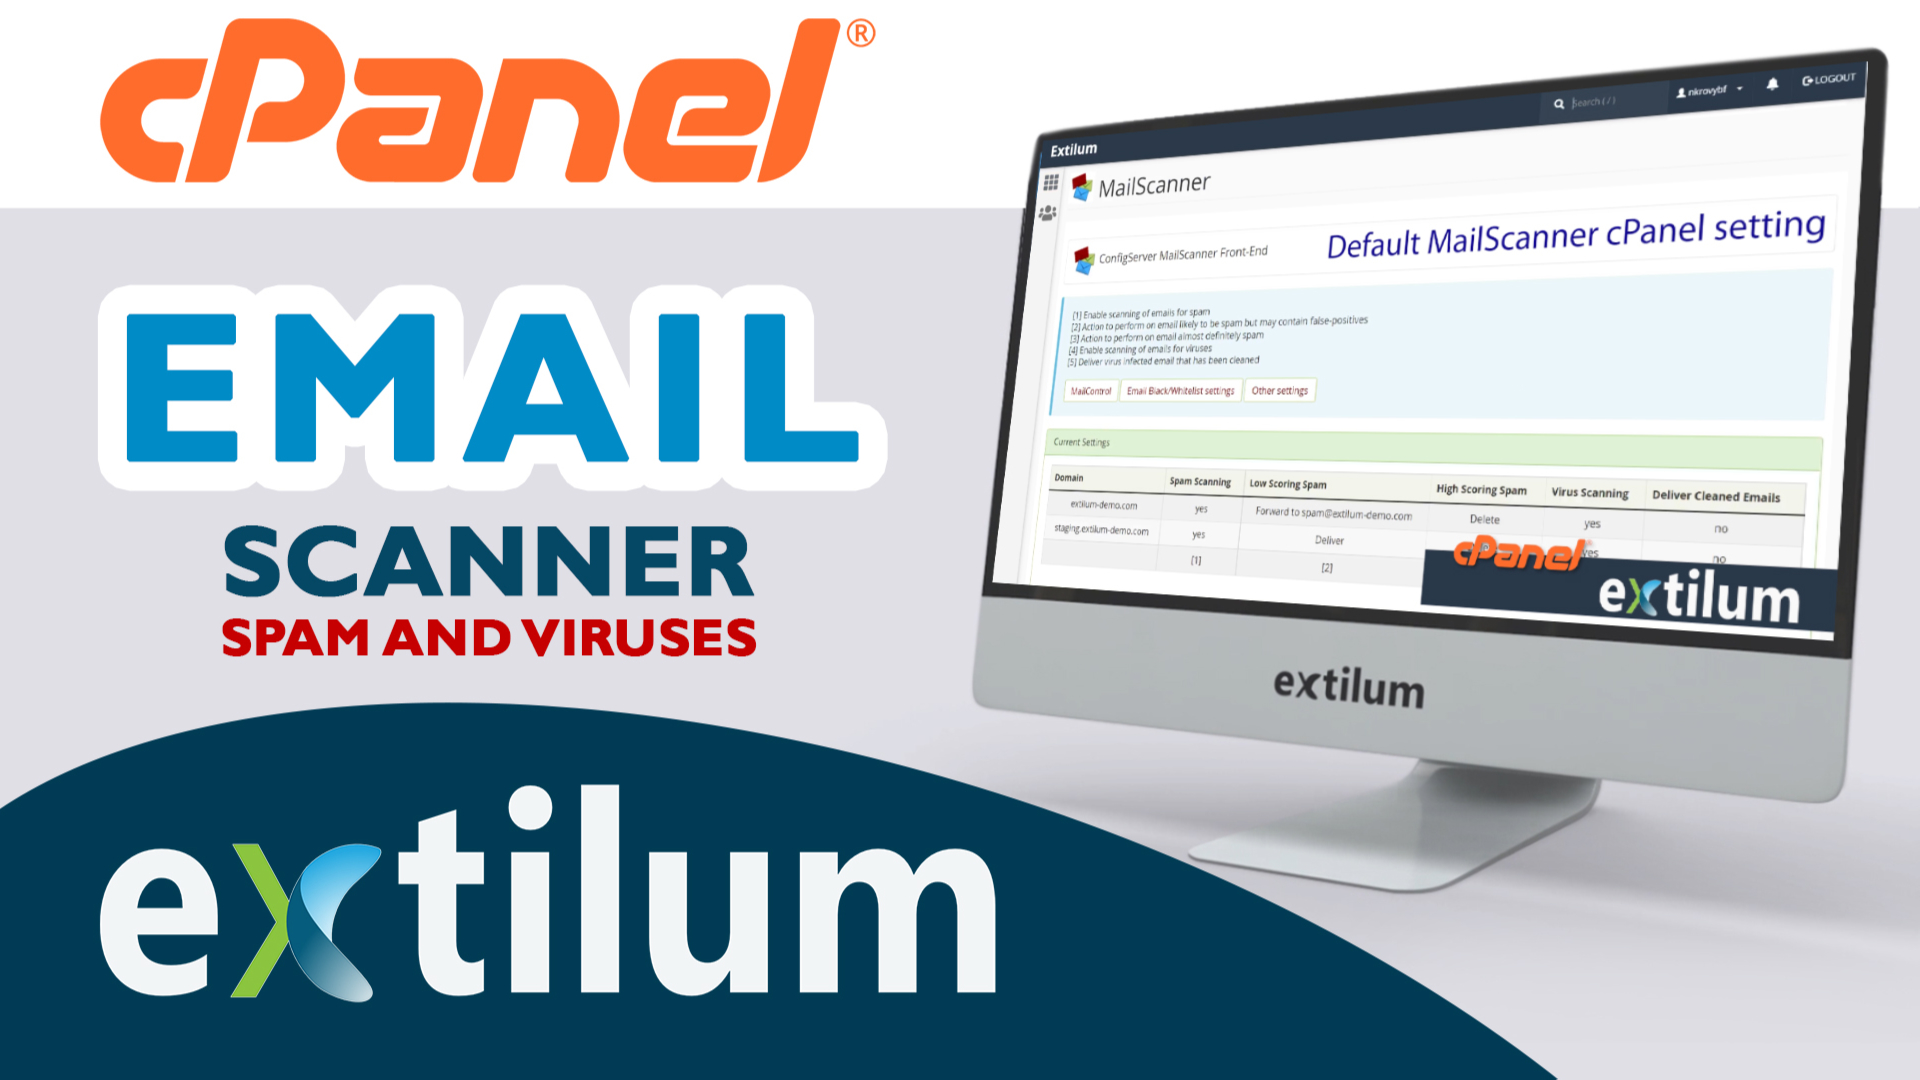 Extilum cPanel - Email Scanner for spam and viruses